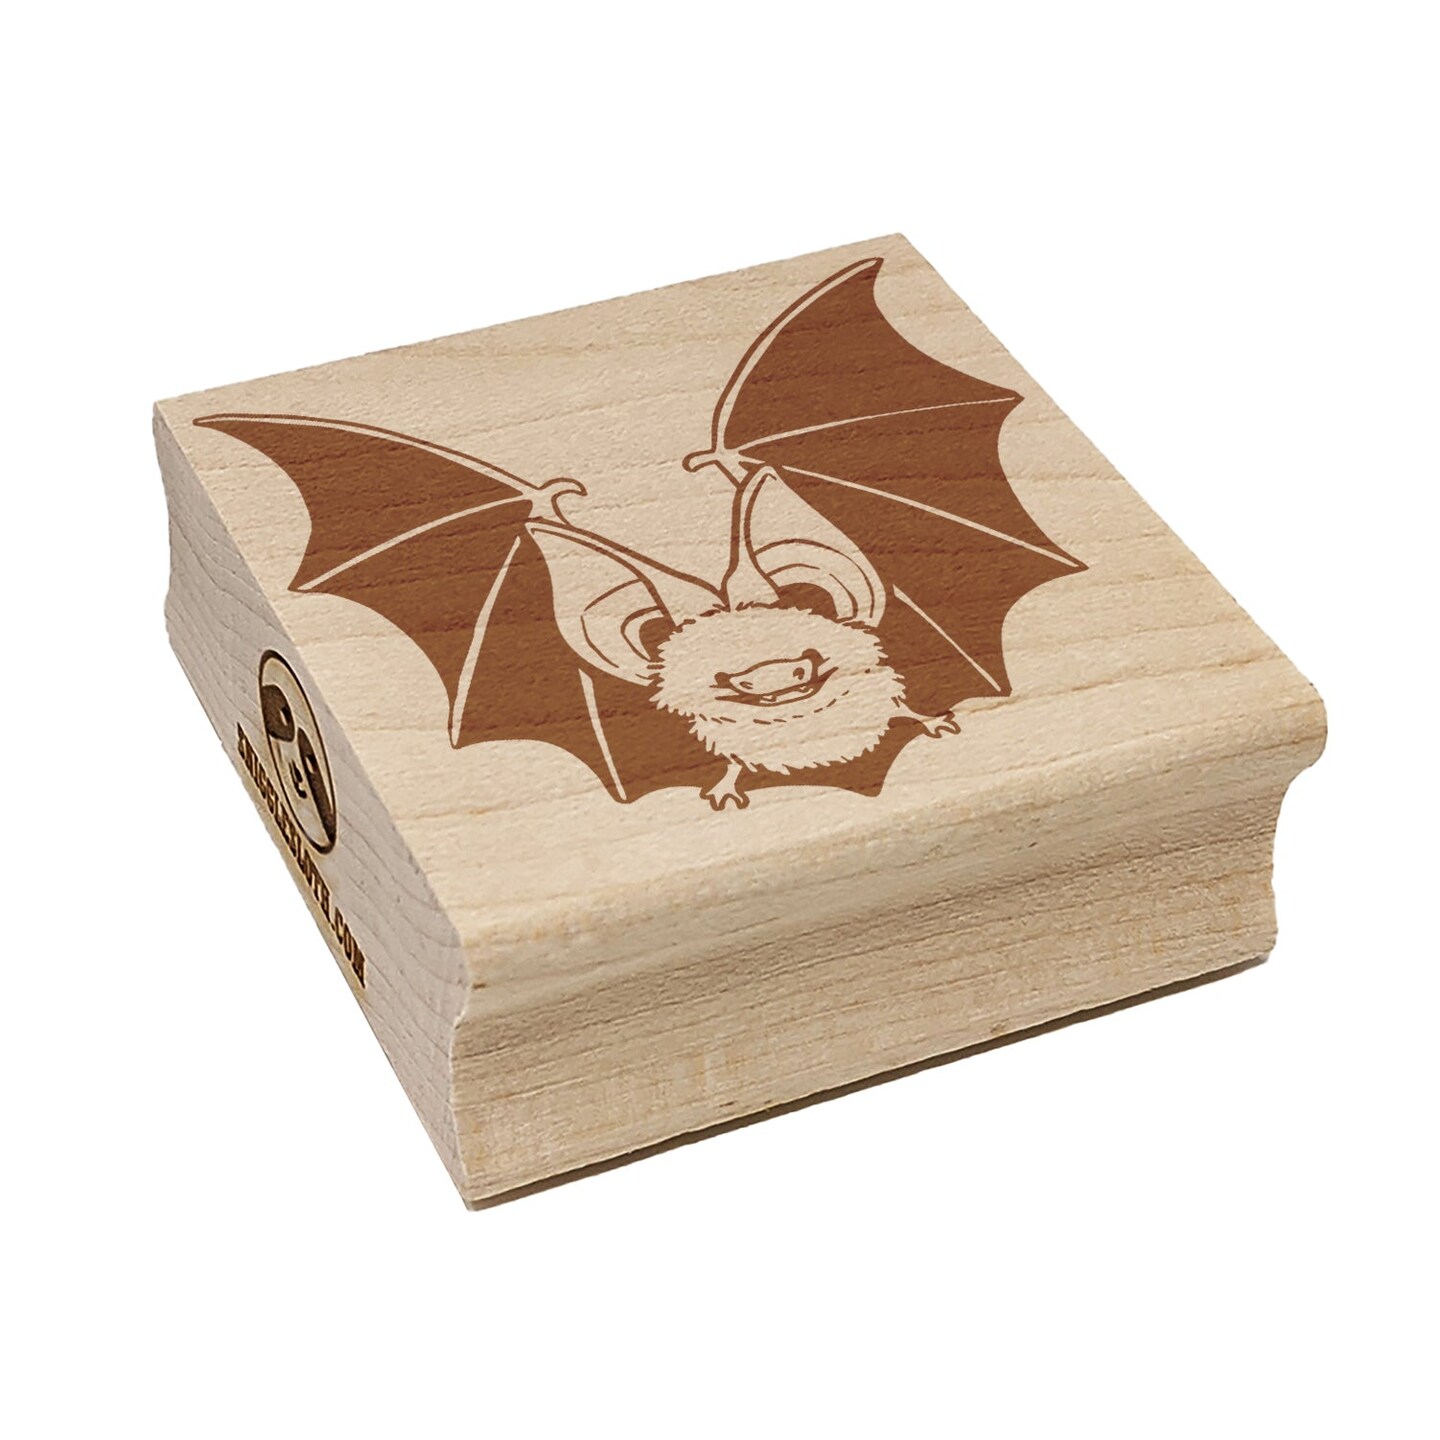 Adorable Long Eared Bat Square Rubber Stamp for Stamping Crafting